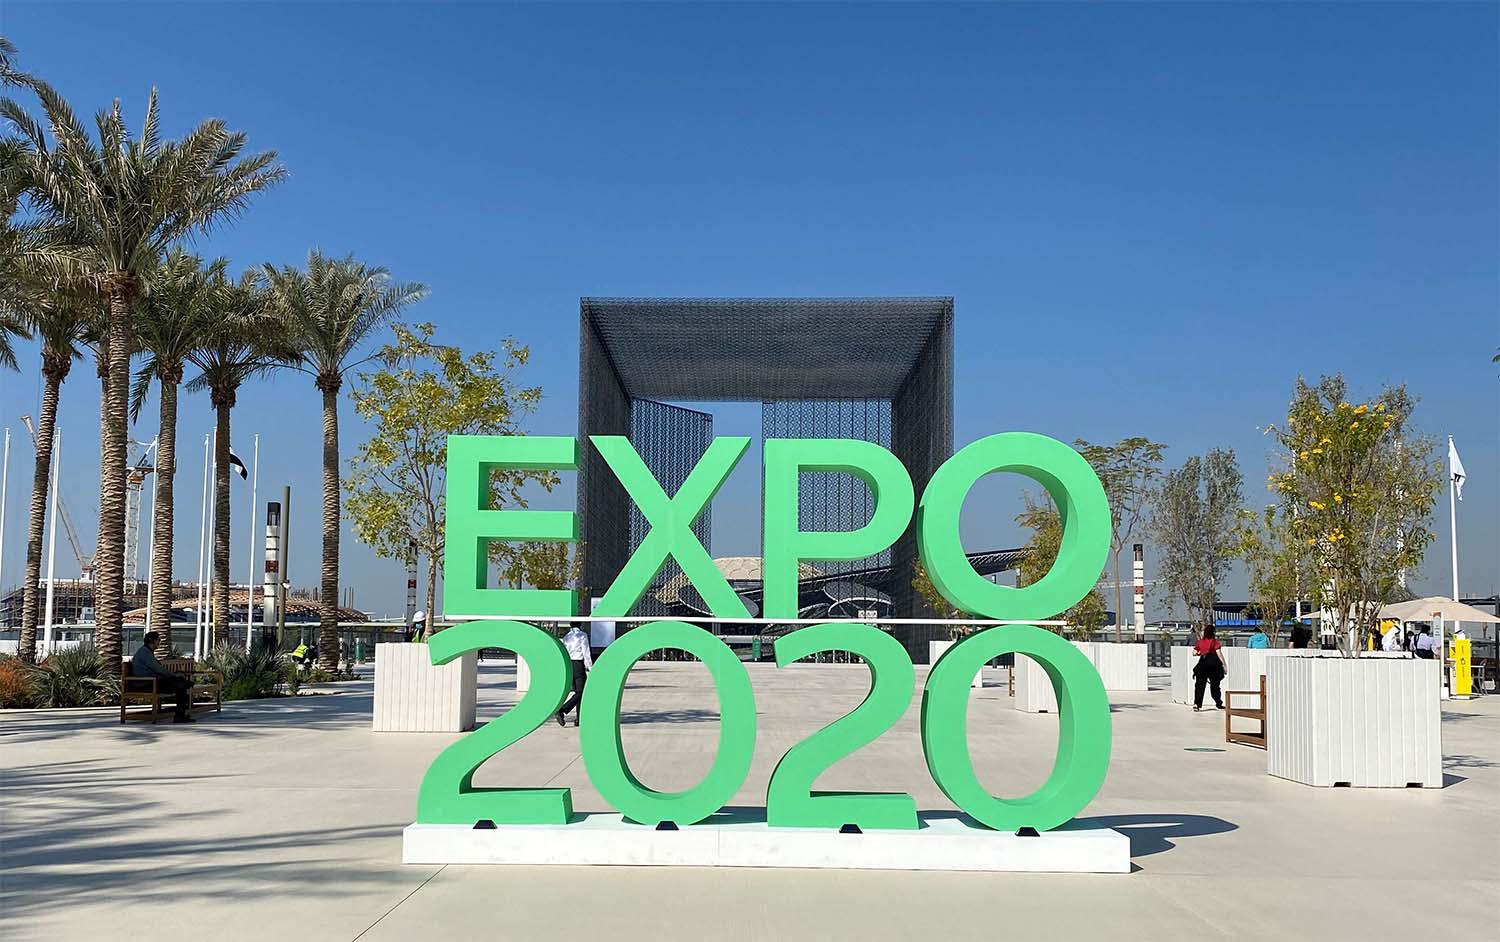 Dubai hopes Expo 2020 will bring in 25 million domestic and foreign visitors